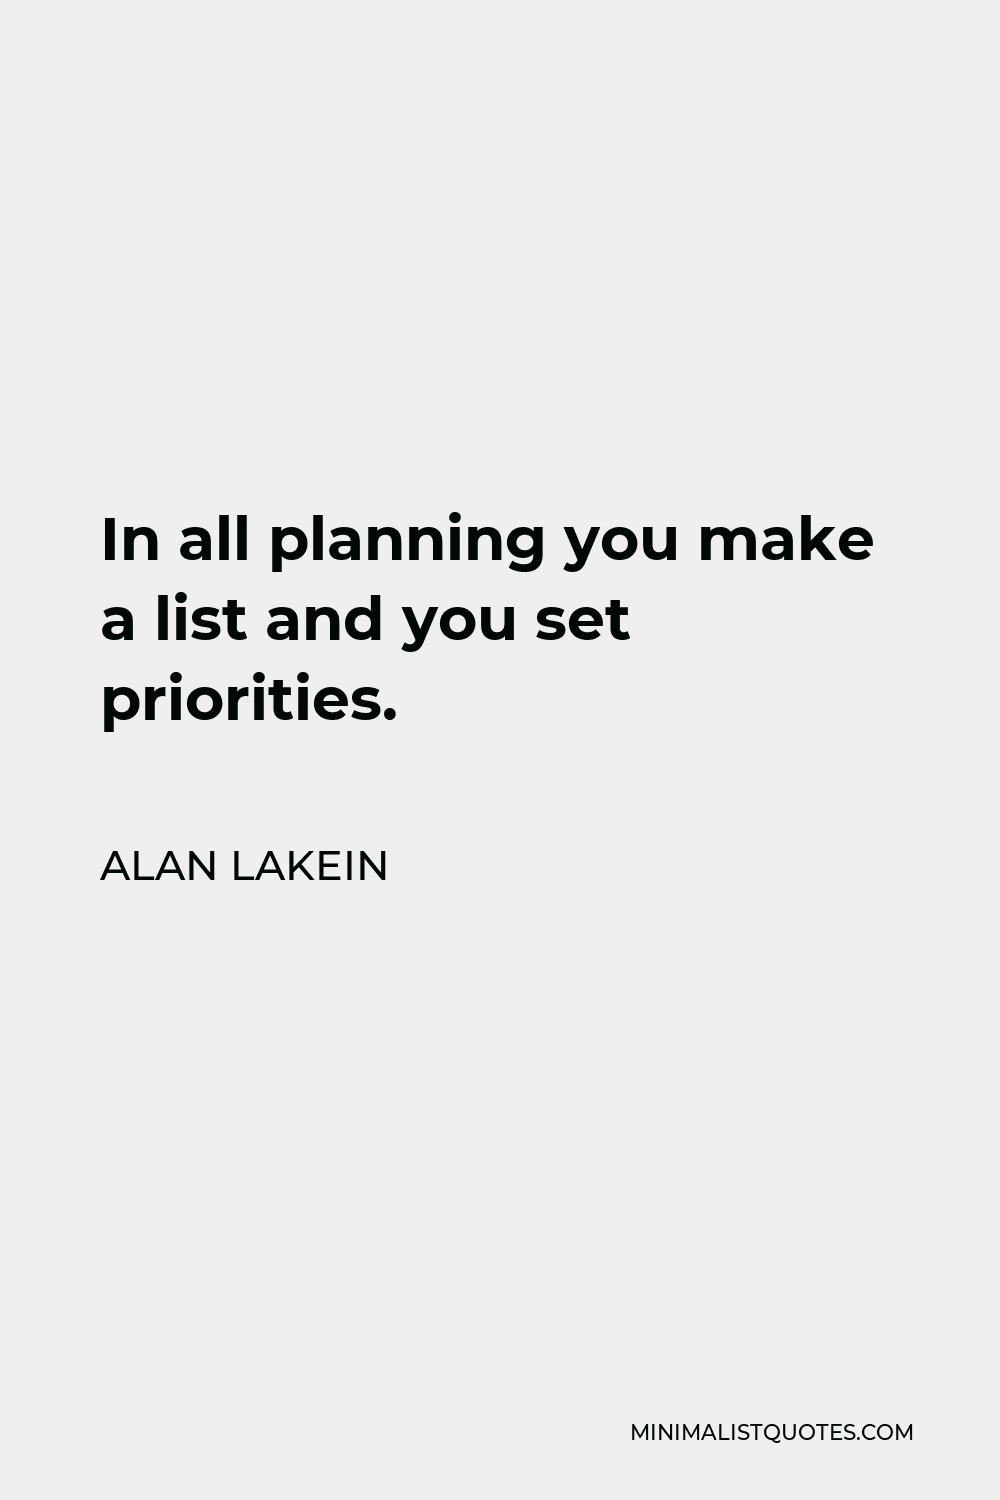 Alan Lakein Quote - In all planning you make a list and you set priorities.